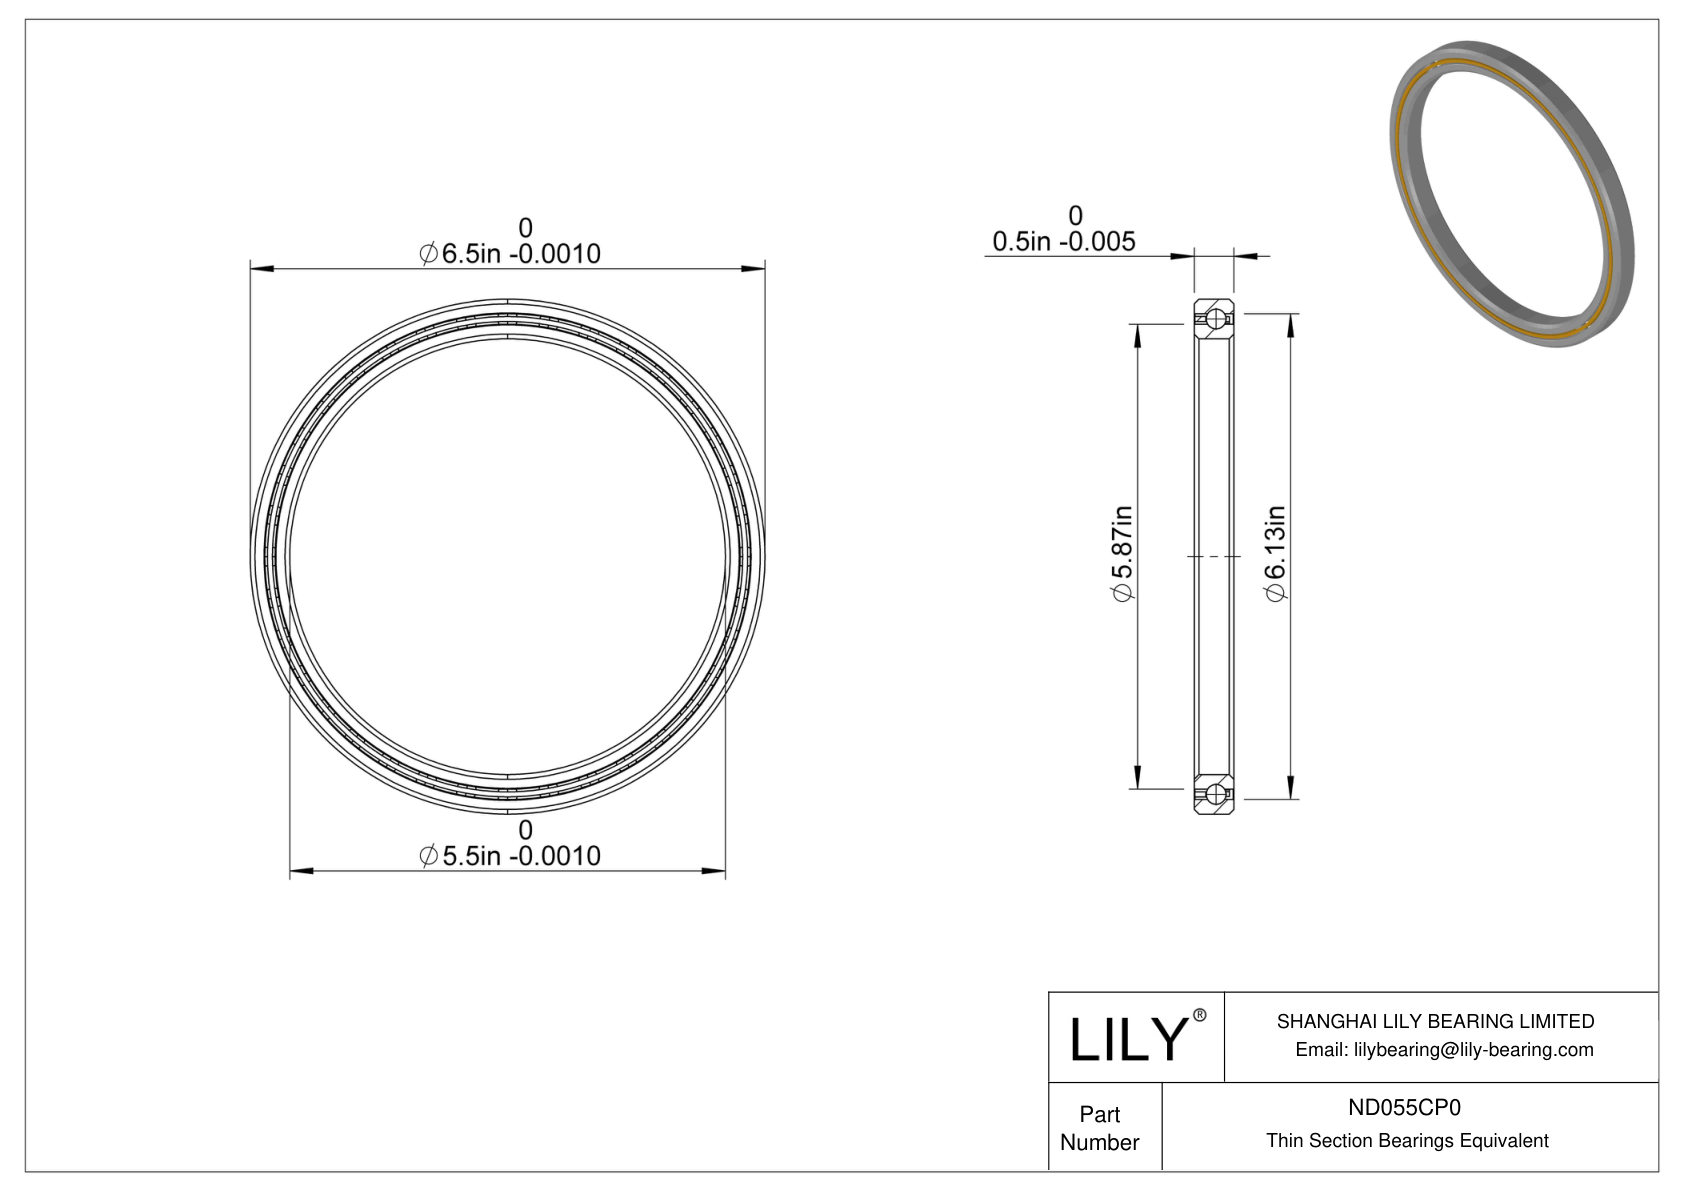 ND055CP0 Constant Section (CS) Bearings cad drawing